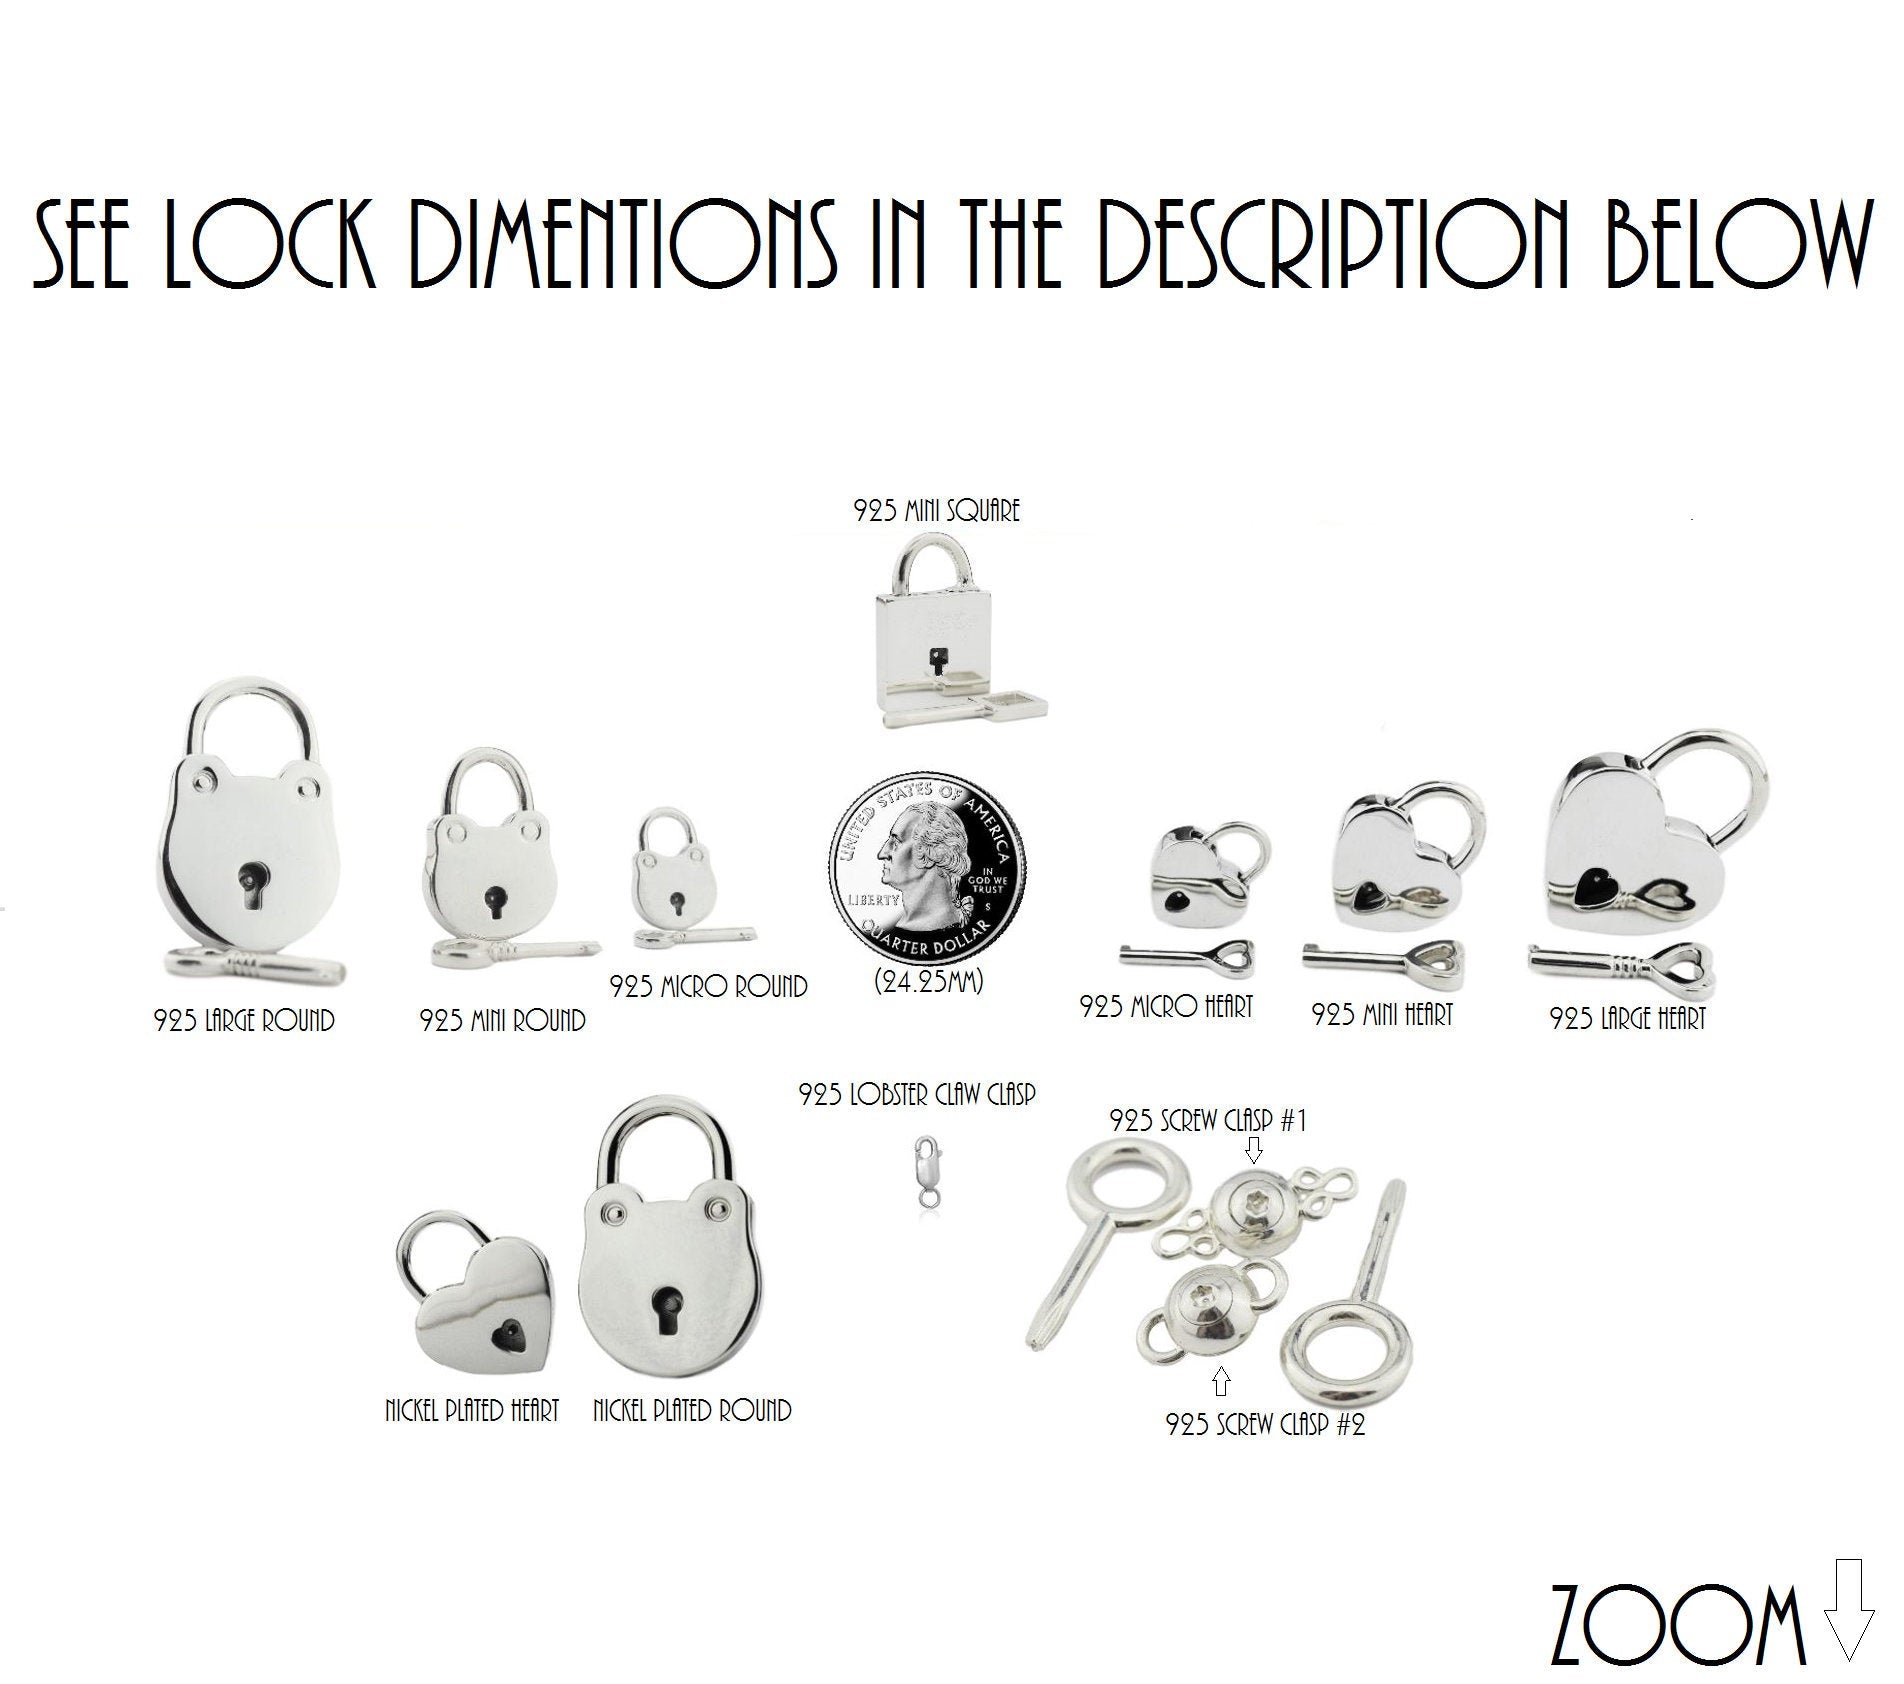 High Quality 925 Sterling Silver Hypoallergenic Locking, lock, padlock BDSM Cuff Day Collar Bondage Sub Kink Slave Submissive ToBeHis Engraving